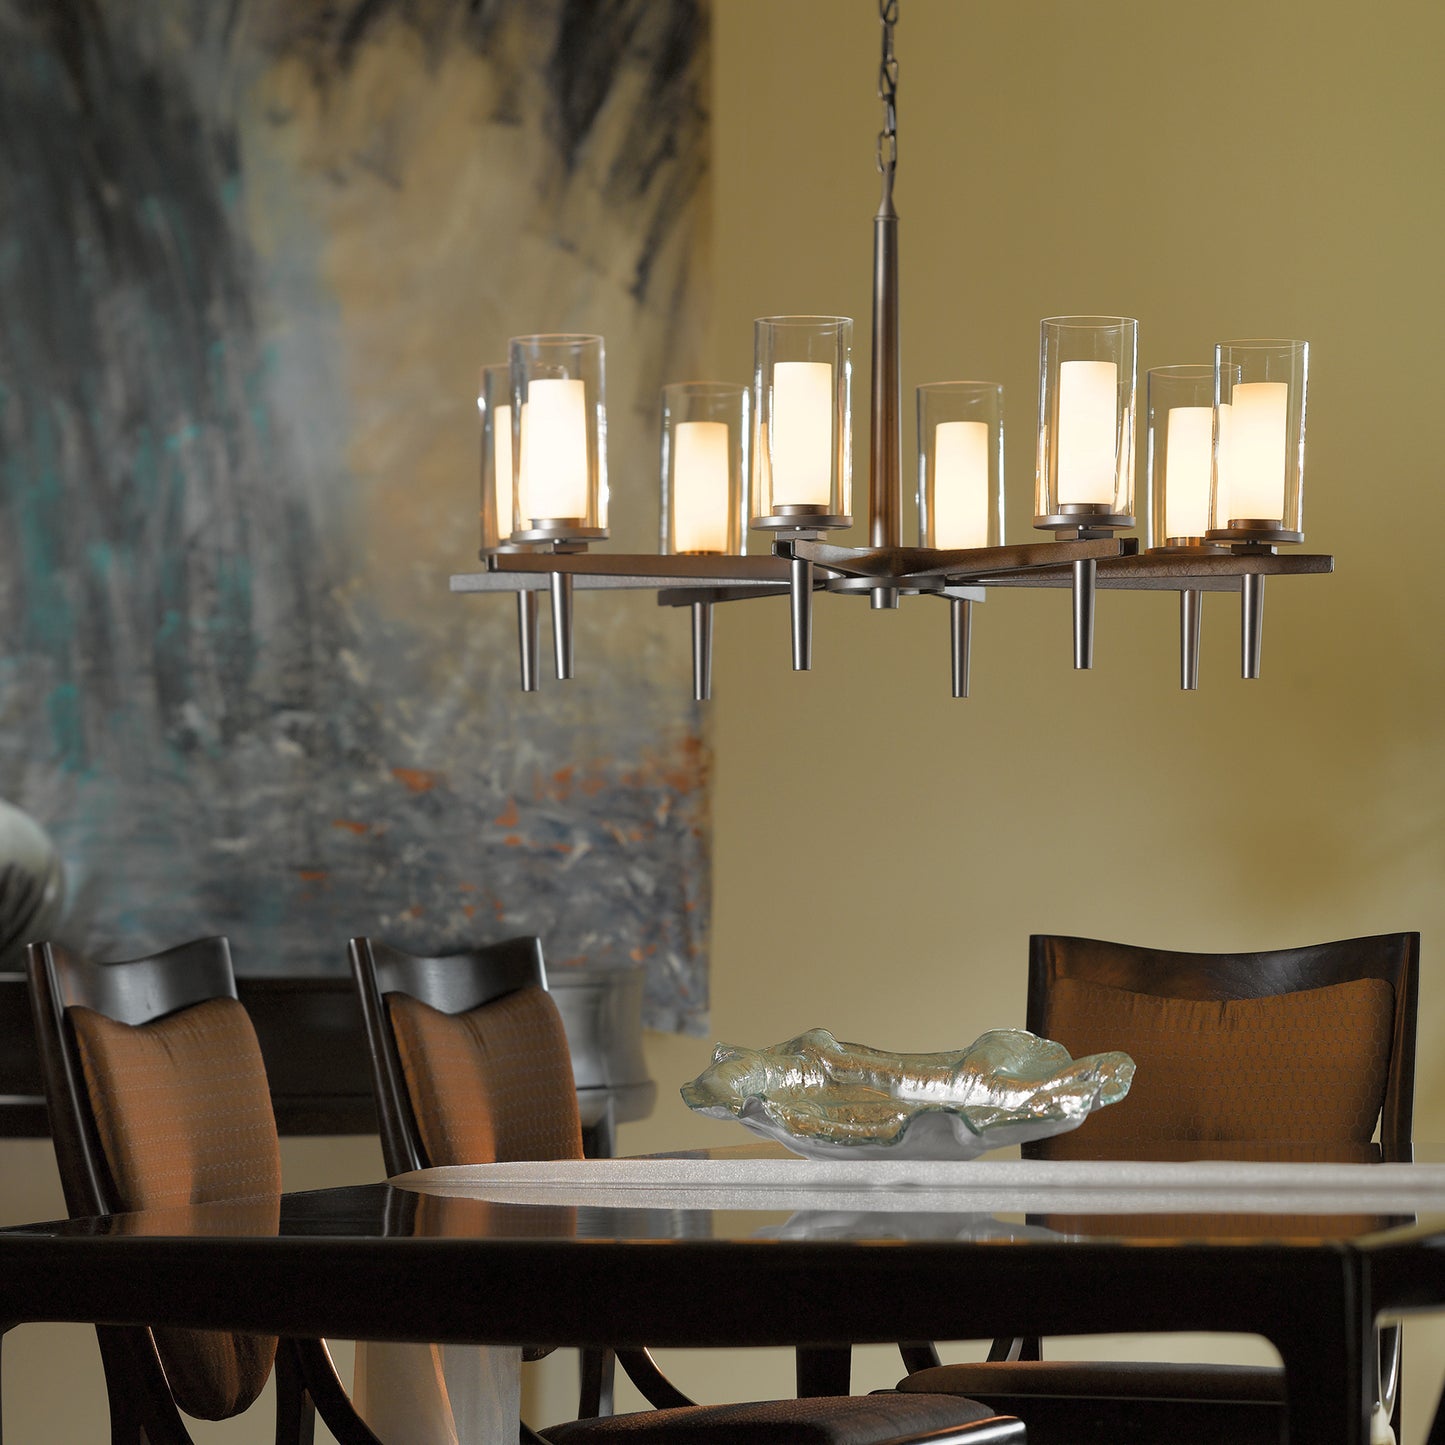 A Constellation 8-Arm Chandelier from Hubbardton Forge hanging over a dining room table.